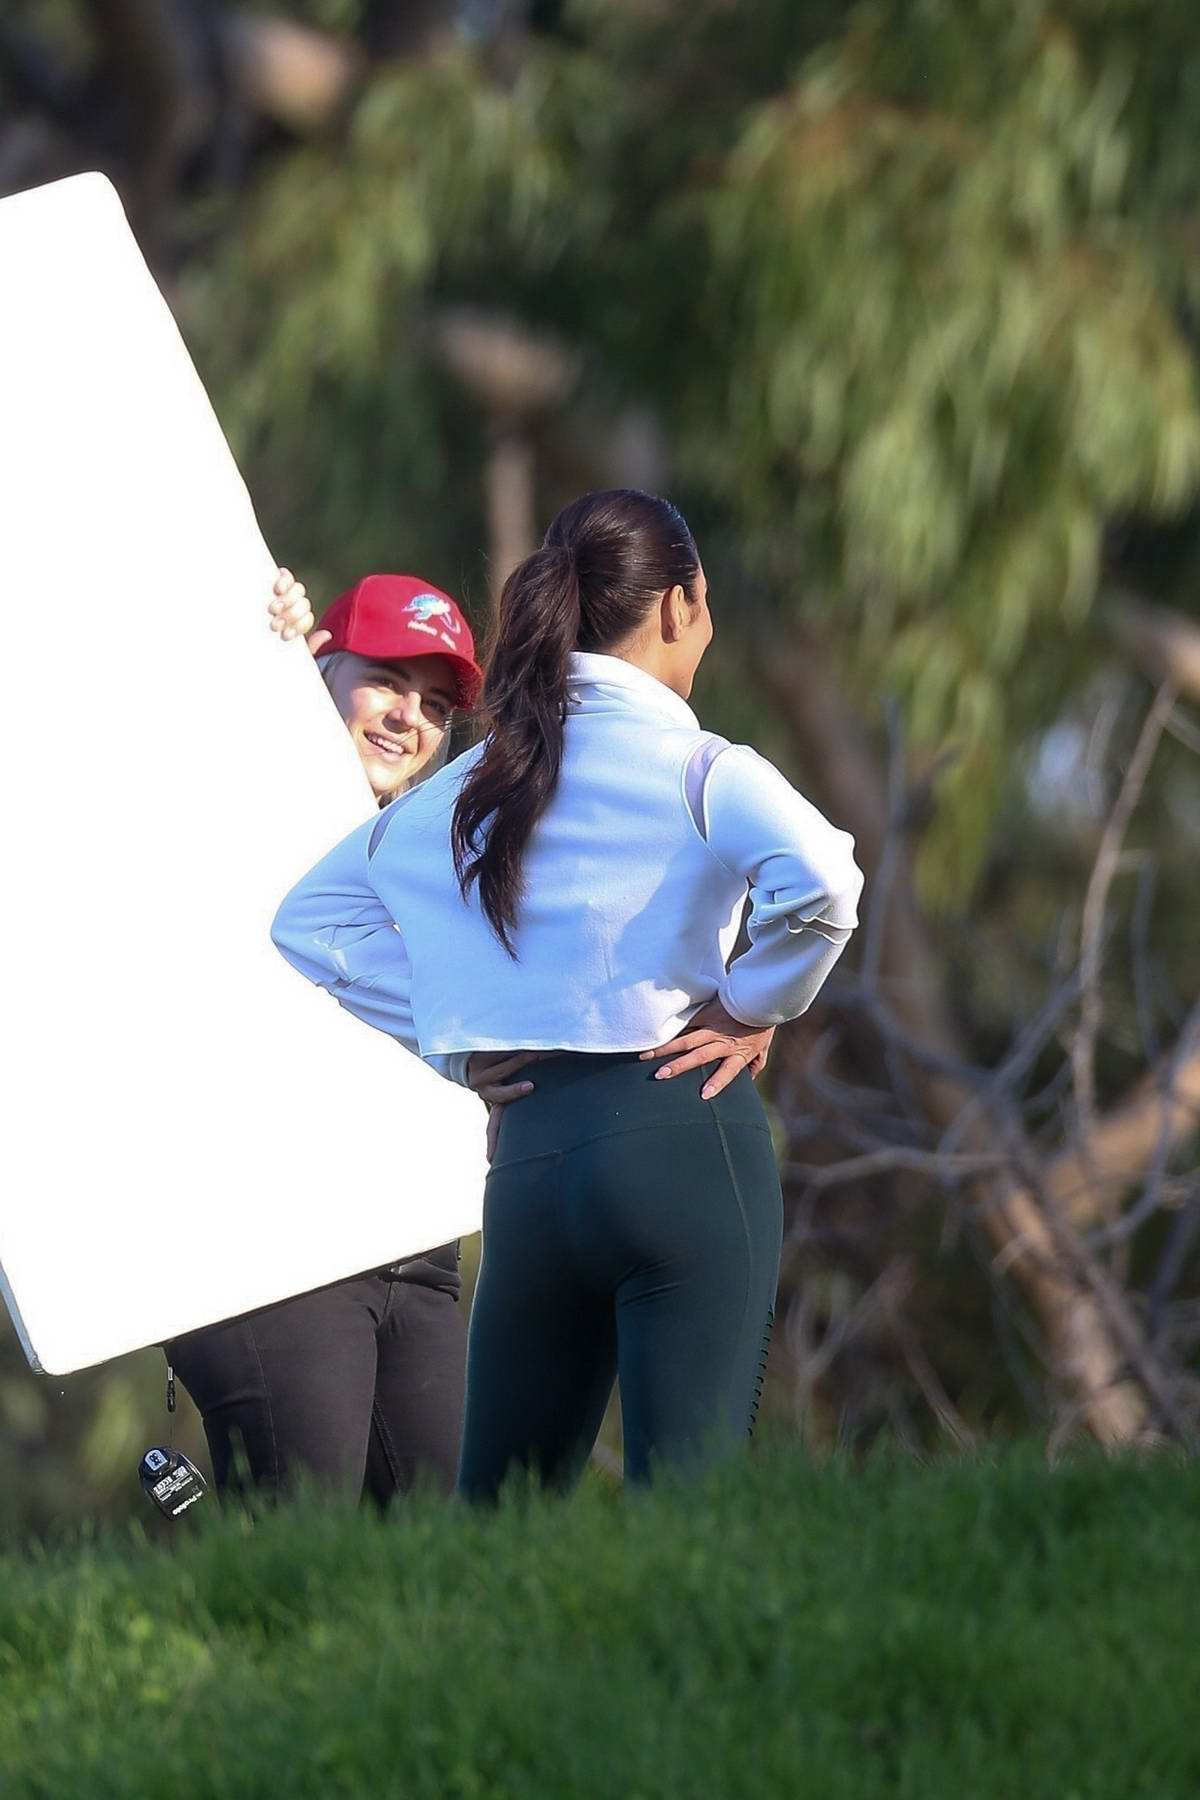 https://www.celebsfirst.com/wp-content/uploads/2020/01/vanessa-hudgens-seen-filming-a-sportswear-ad-for-her-avia-activewear-collection-in-los-angeles-160120_8.jpg